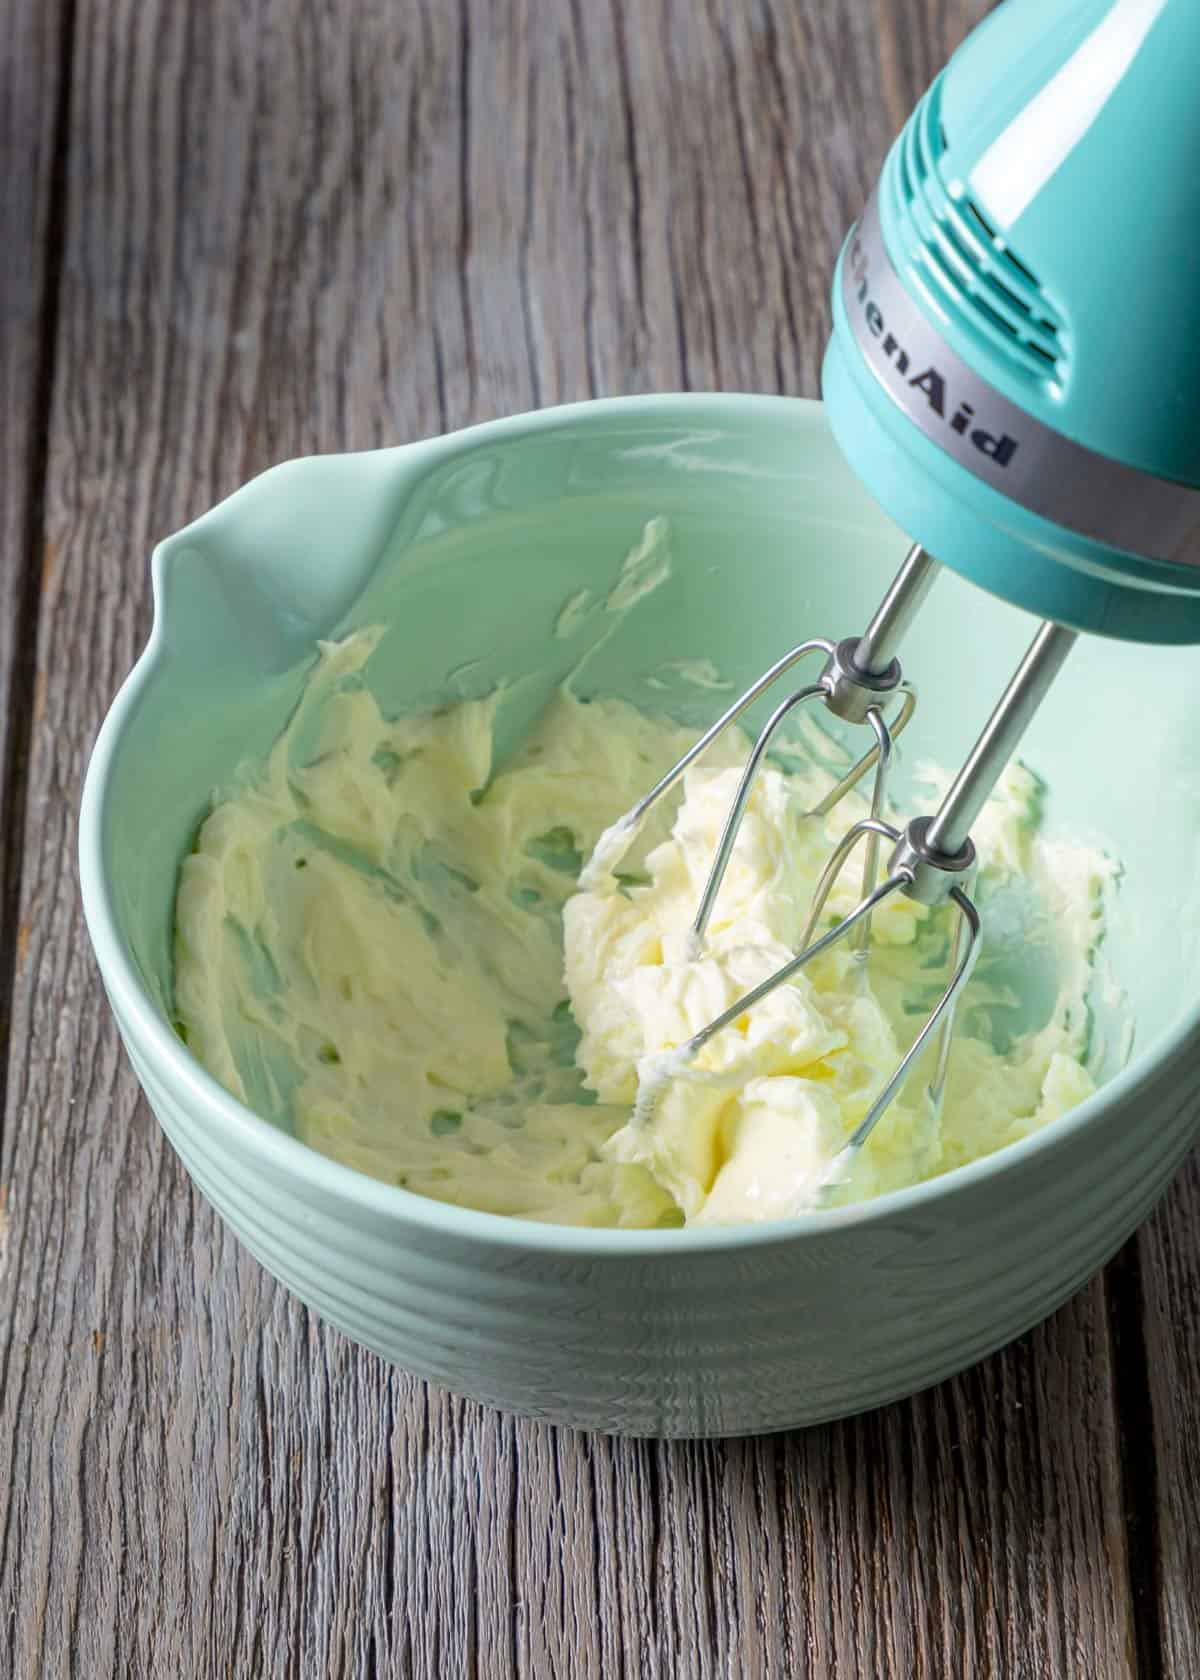 Beating butter in a bowl with a mixer. 